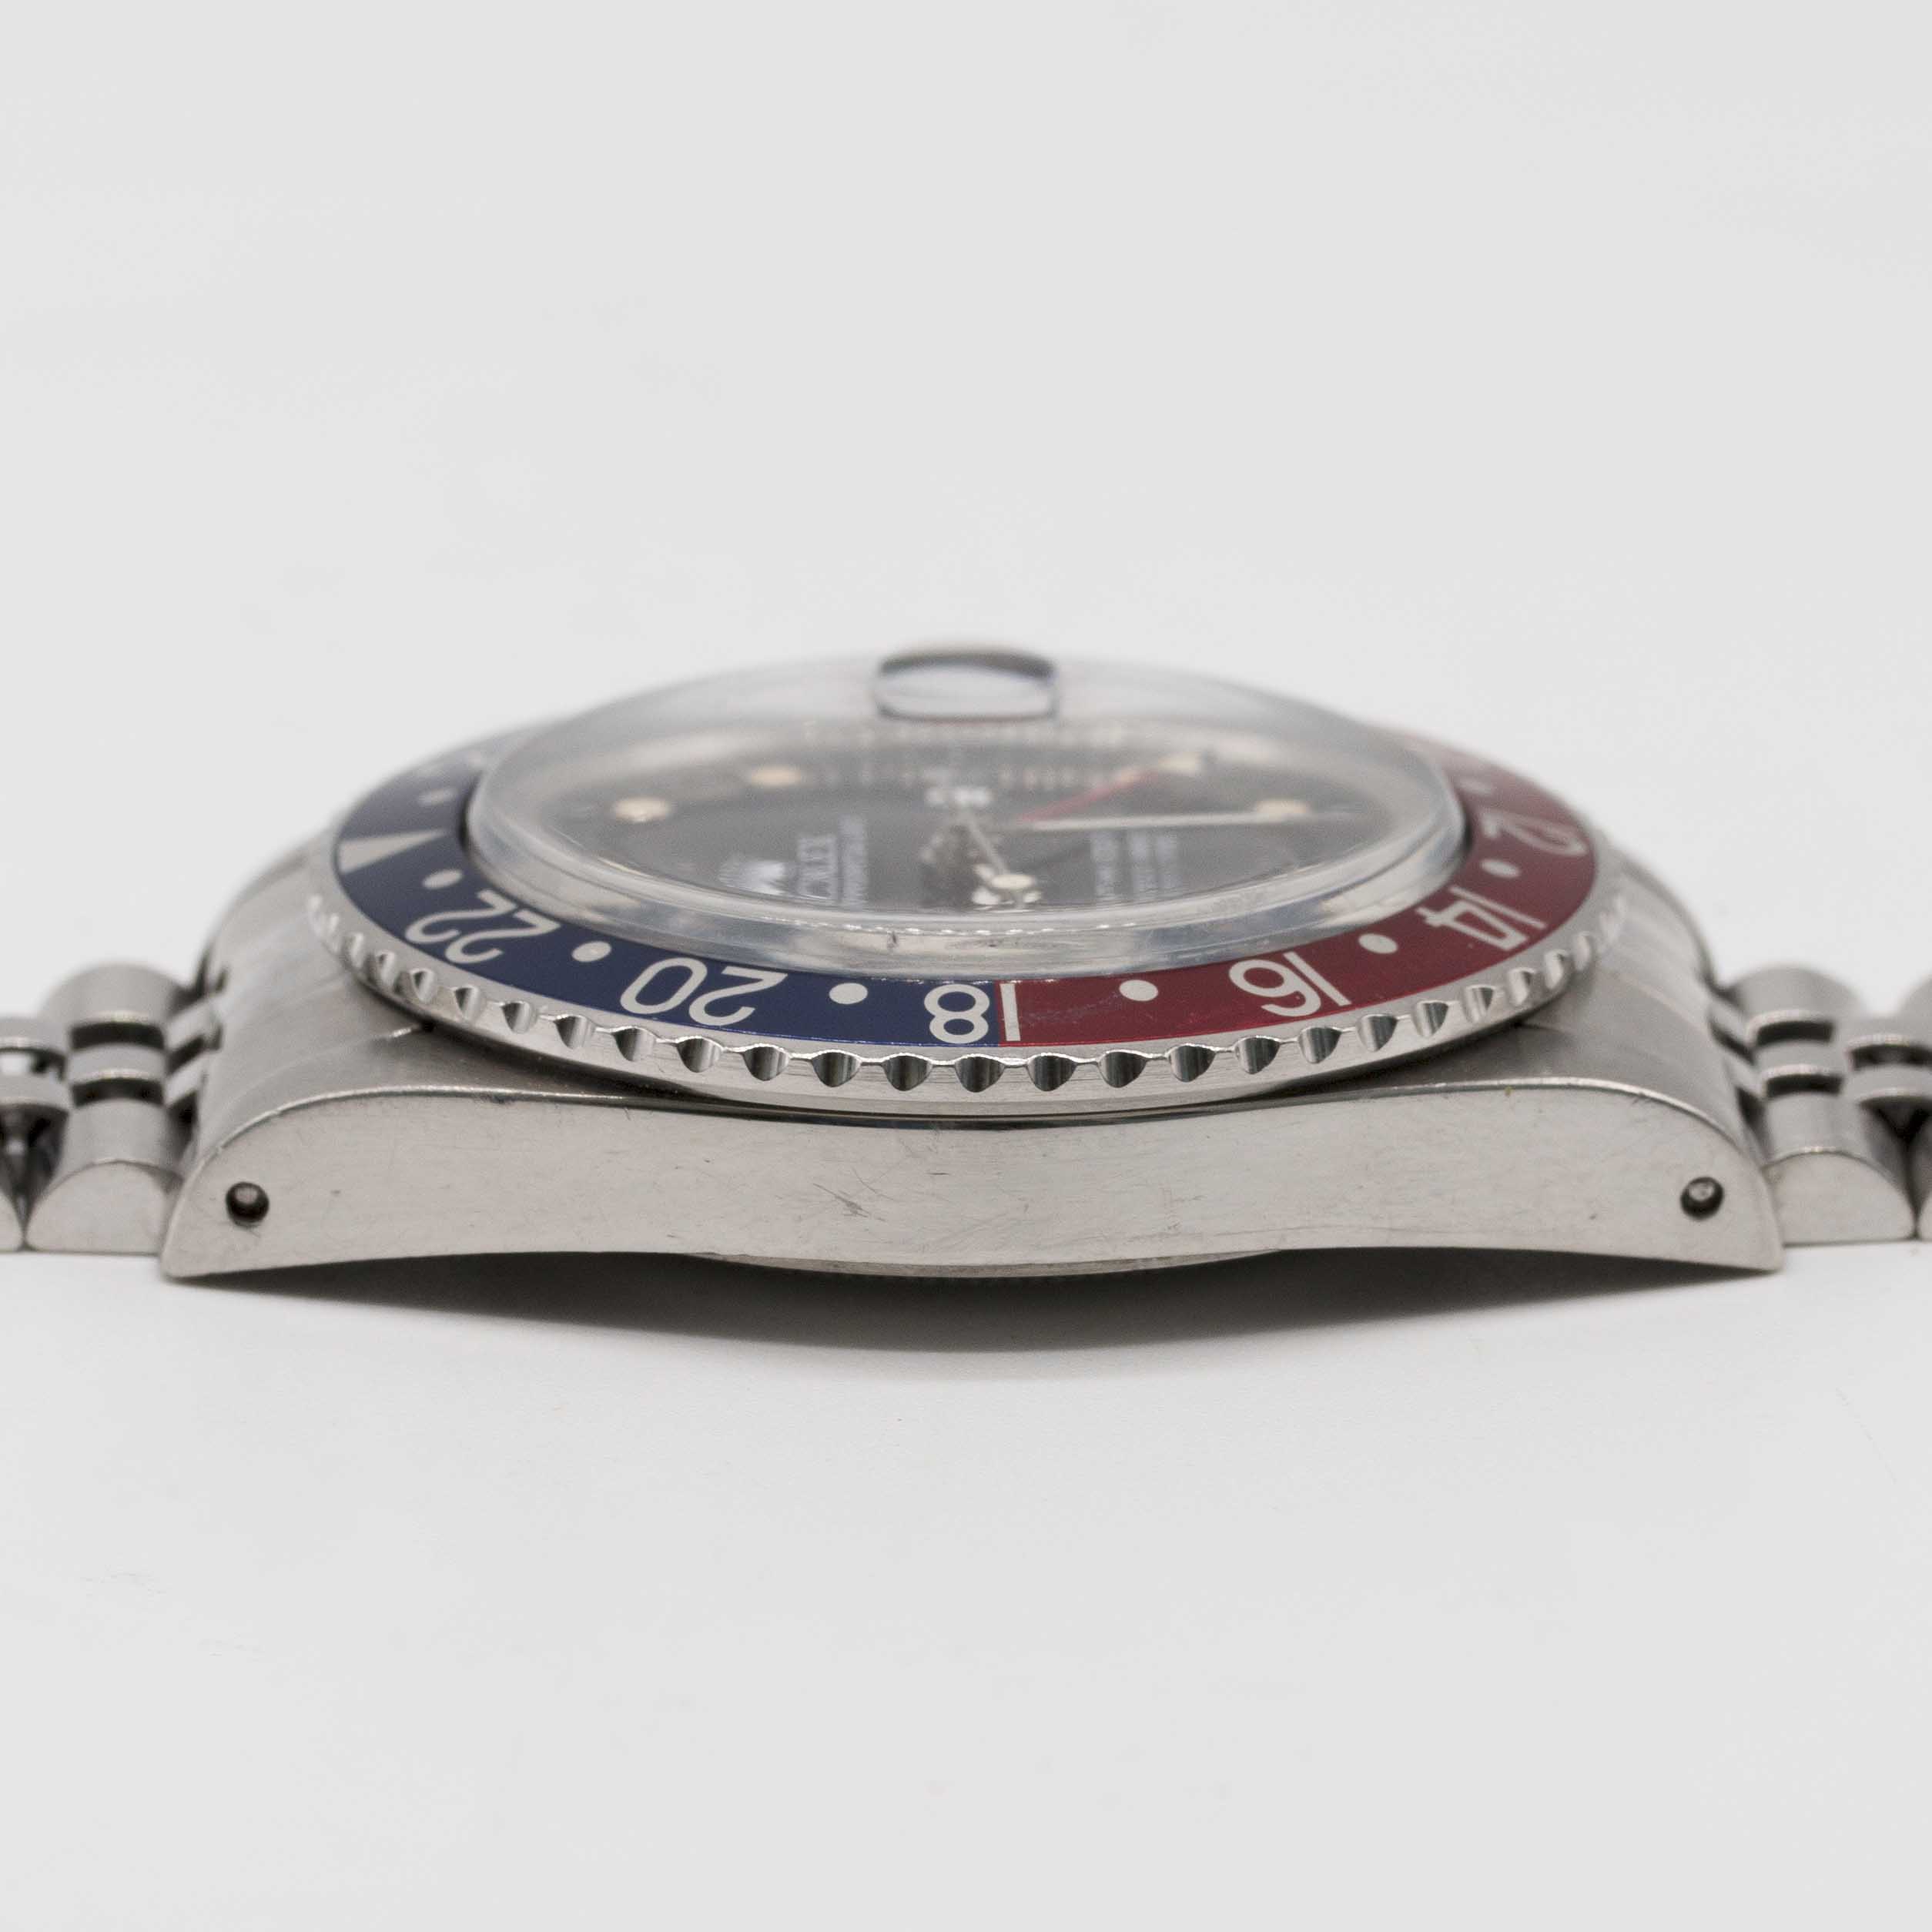 A GENTLEMAN'S STAINLESS STEEL ROLEX OYSTER PERPETUAL GMT MASTER BRACELET WATCH CIRCA 1984, REF. - Image 10 of 10